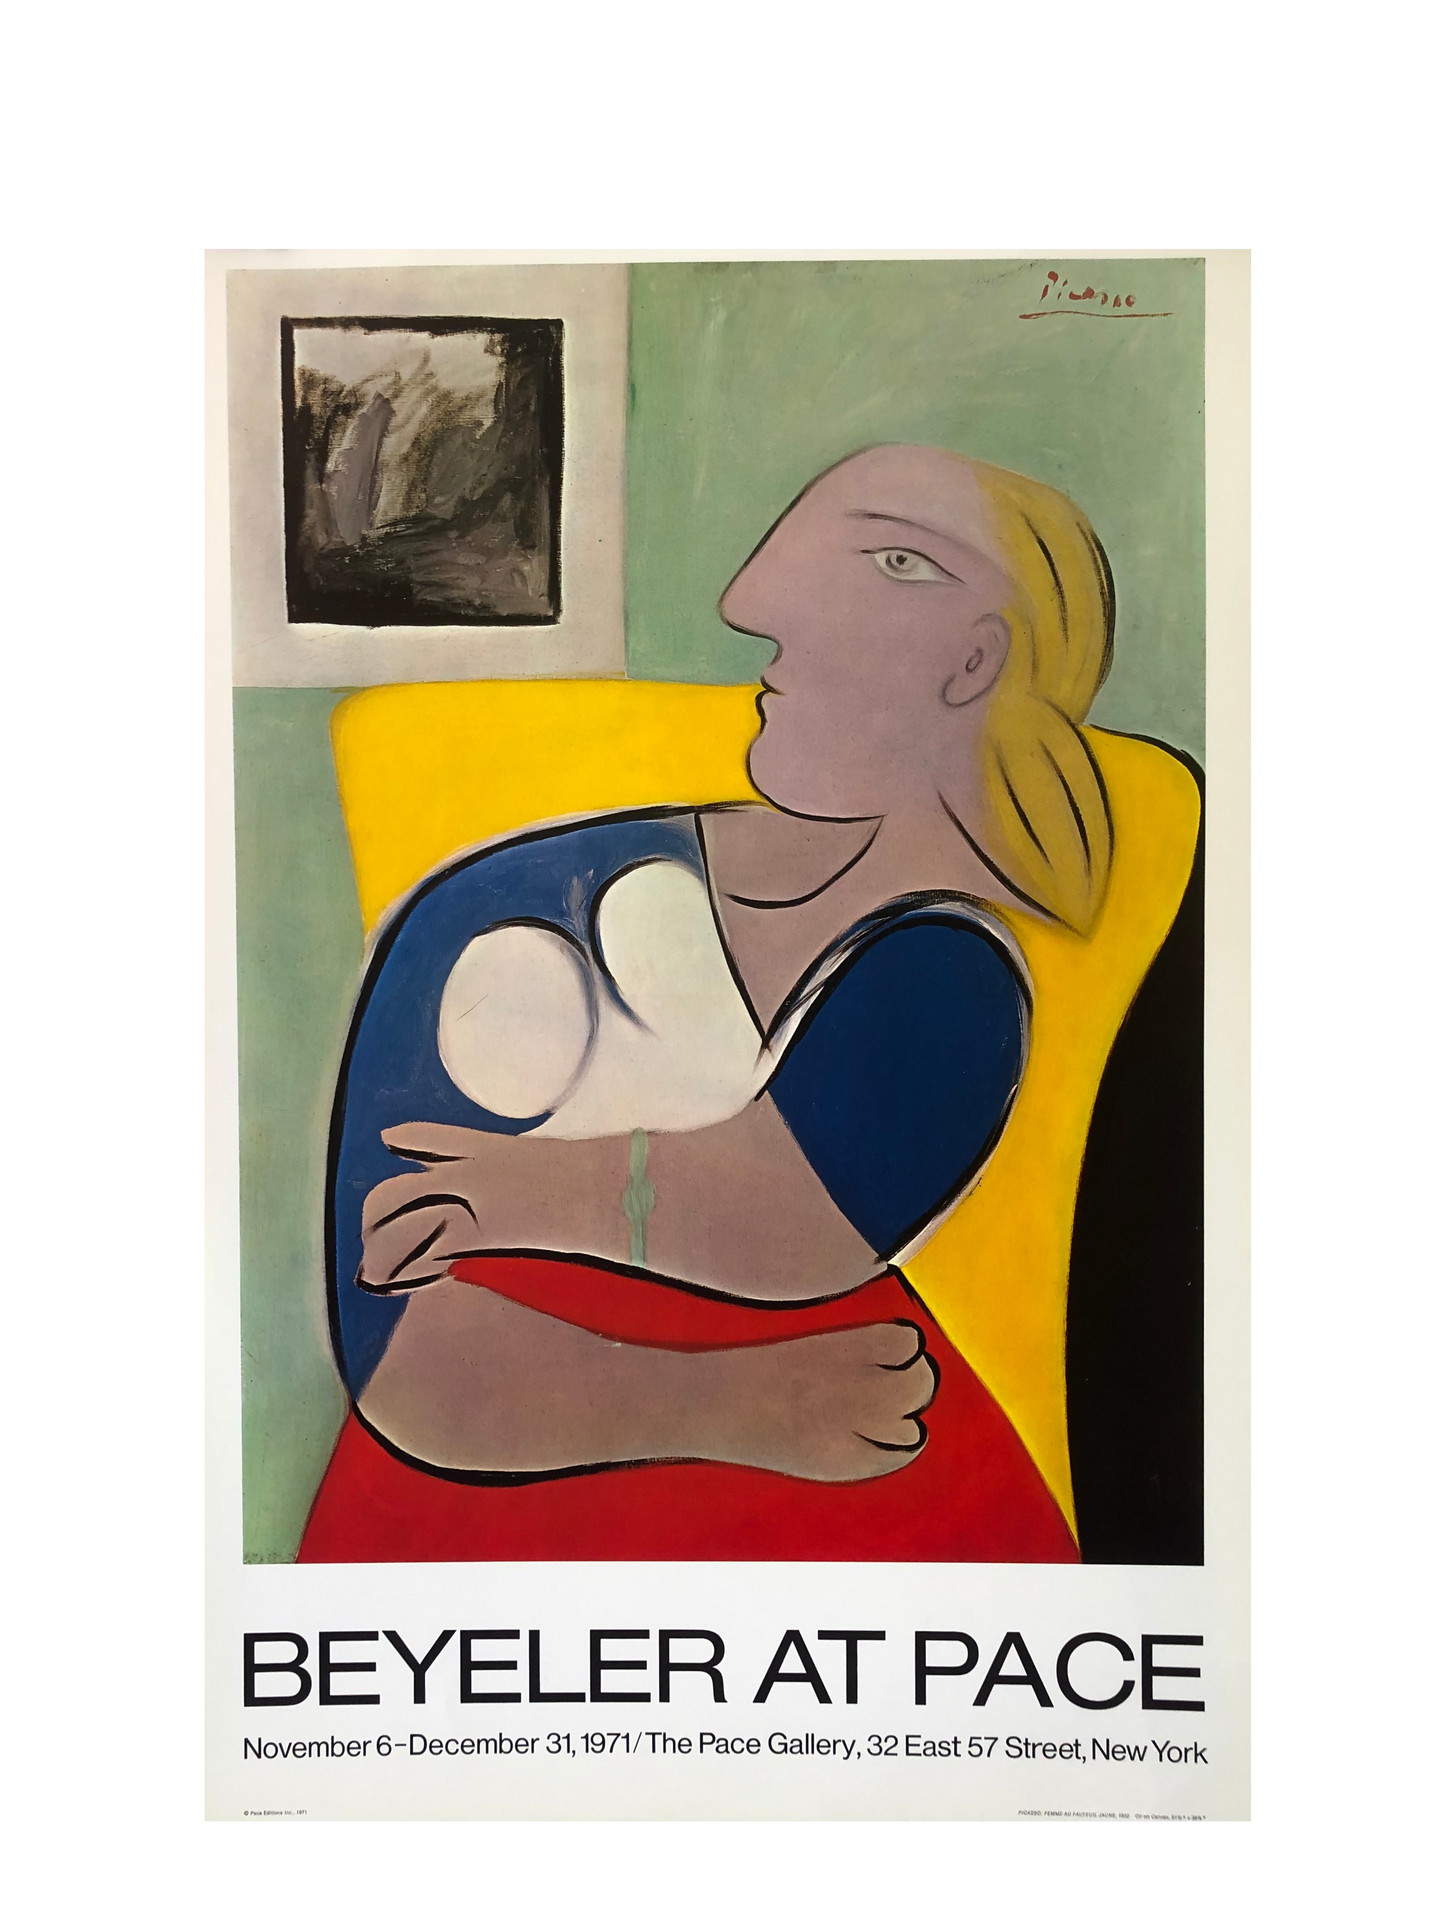 Picasso, 'Beyeler at Pace', The Pace Gallery Exhibition Poster 1971